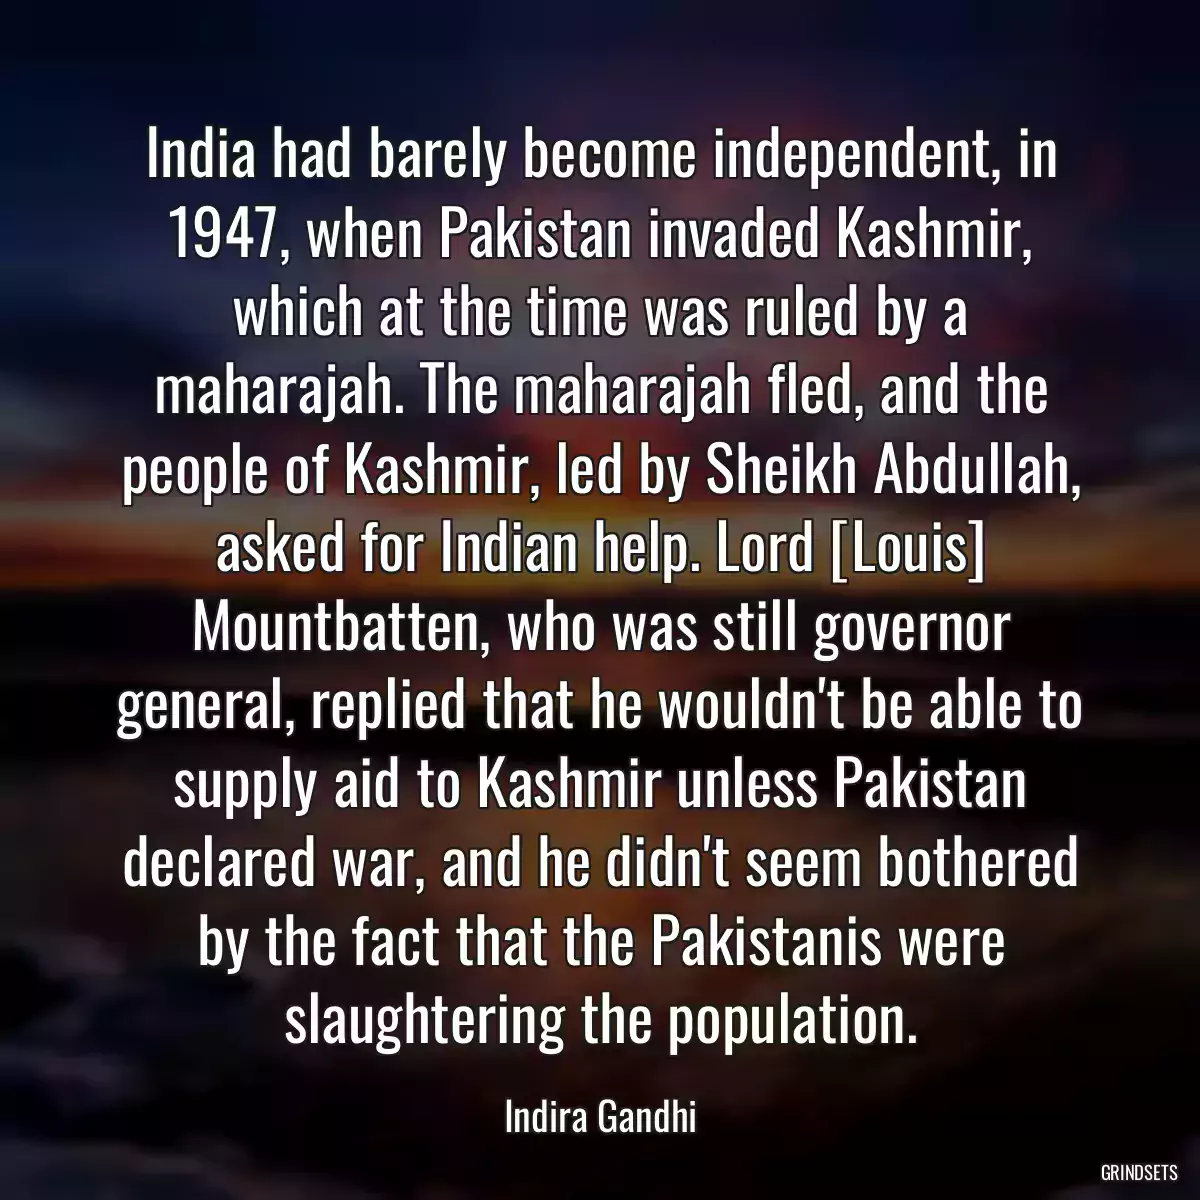 India had barely become independent, in 1947, when Pakistan invaded Kashmir, which at the time was ruled by a maharajah. The maharajah fled, and the people of Kashmir, led by Sheikh Abdullah, asked for Indian help. Lord [Louis] Mountbatten, who was still governor general, replied that he wouldn\'t be able to supply aid to Kashmir unless Pakistan declared war, and he didn\'t seem bothered by the fact that the Pakistanis were slaughtering the population.